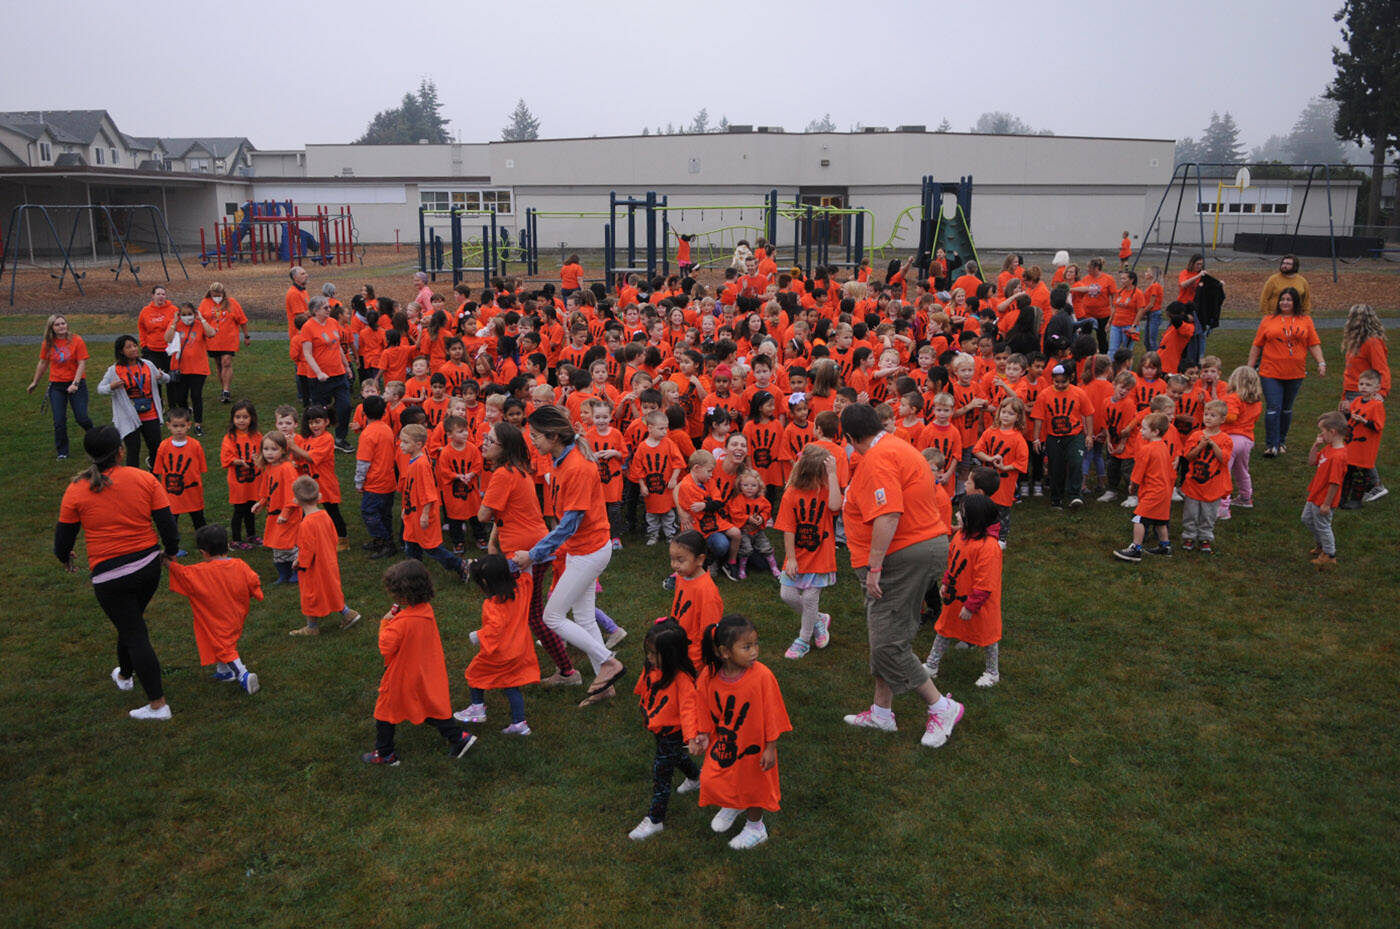 Children disperse after posing for a group photo at Bernard Elementary on Thursday, Sept. 29, 2022. The schools parent advisory council bought an orange T-shirt for every single student at Bernard. (Jenna Hauck/ Chilliwack Progress)